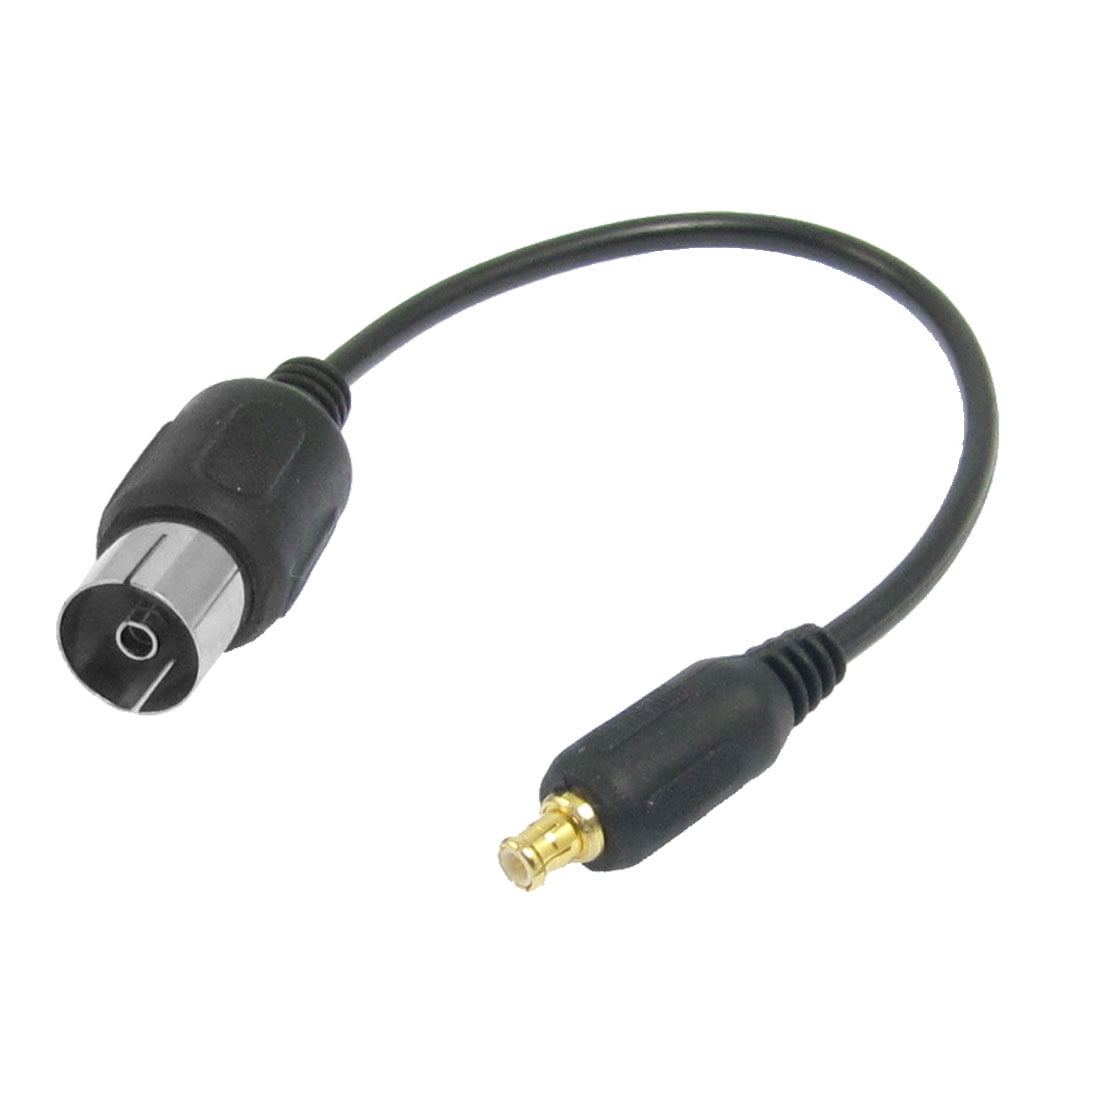 Unique Bargains TV Female to MCX Male Cable Connector Adaptor for DVB-T  Antenna 